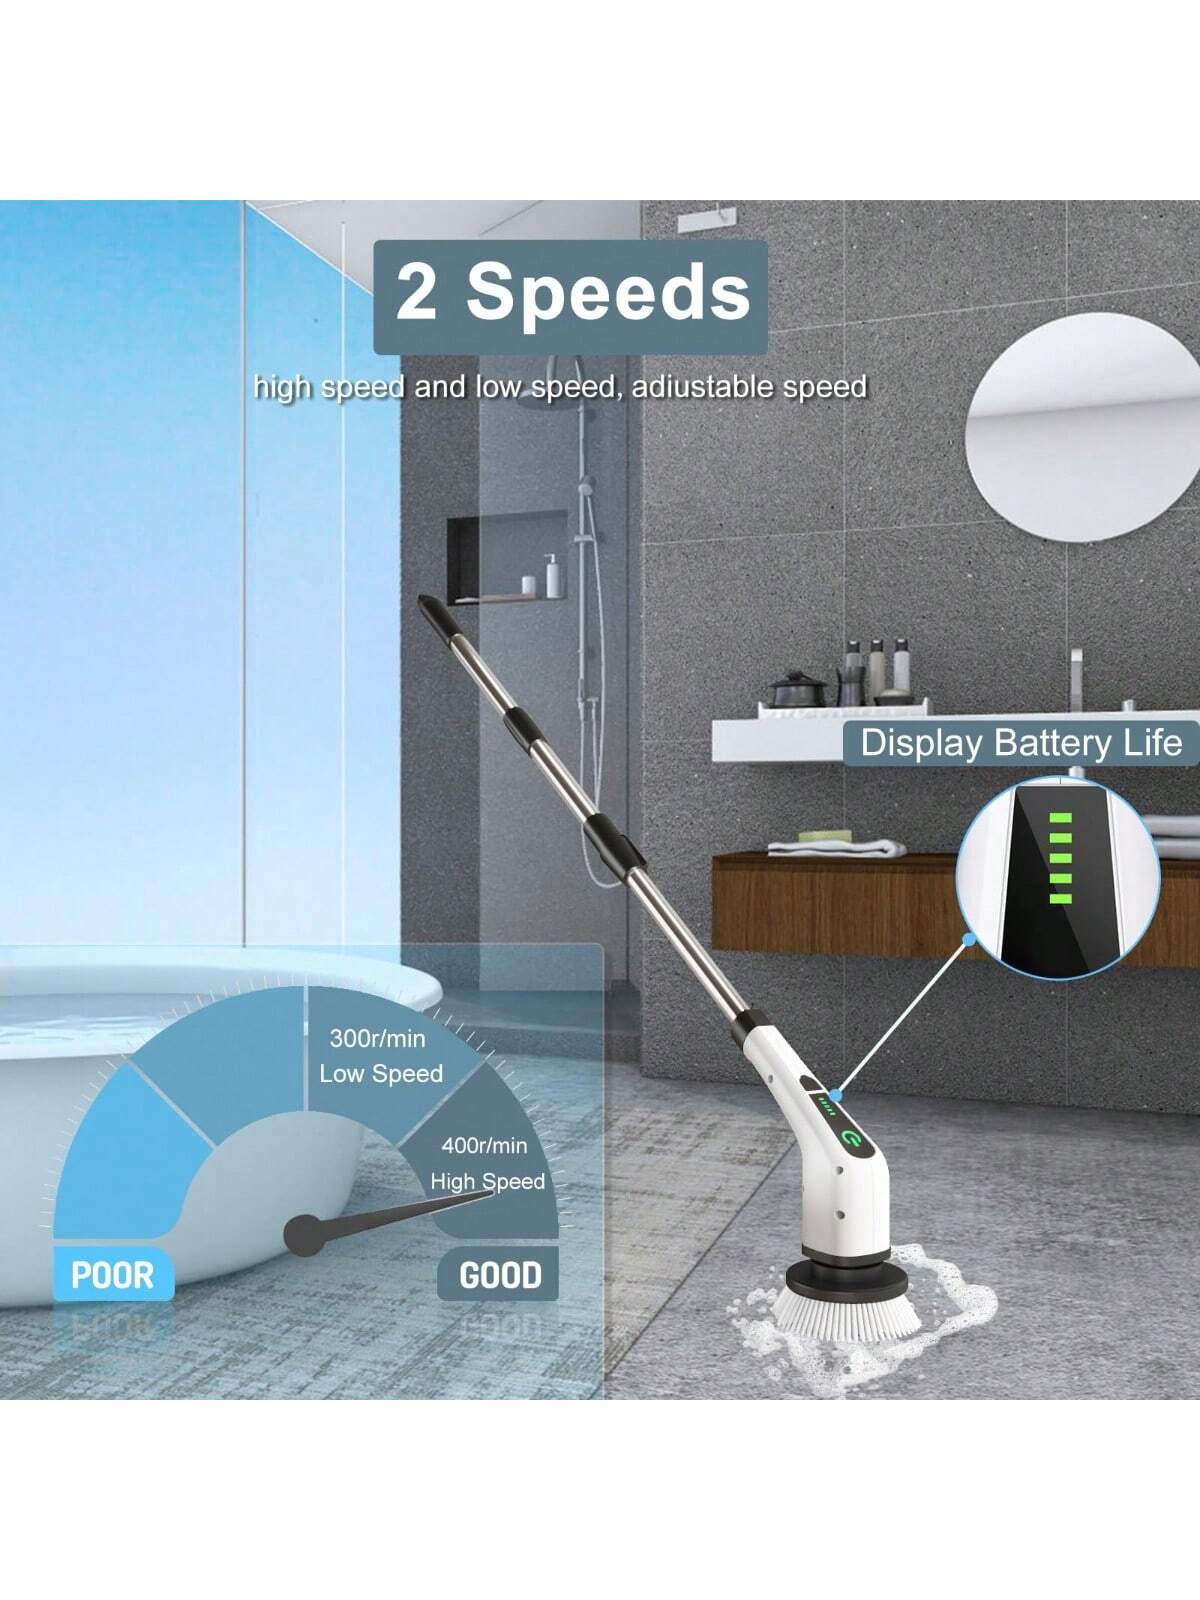 Cordless Electric Spin Scrubber,Cleaning Brush Scrubber for Home,  400RPM/Mins-8 Replaceable Brush Heads-90Mins Work Time,3 Adjustable Size,2